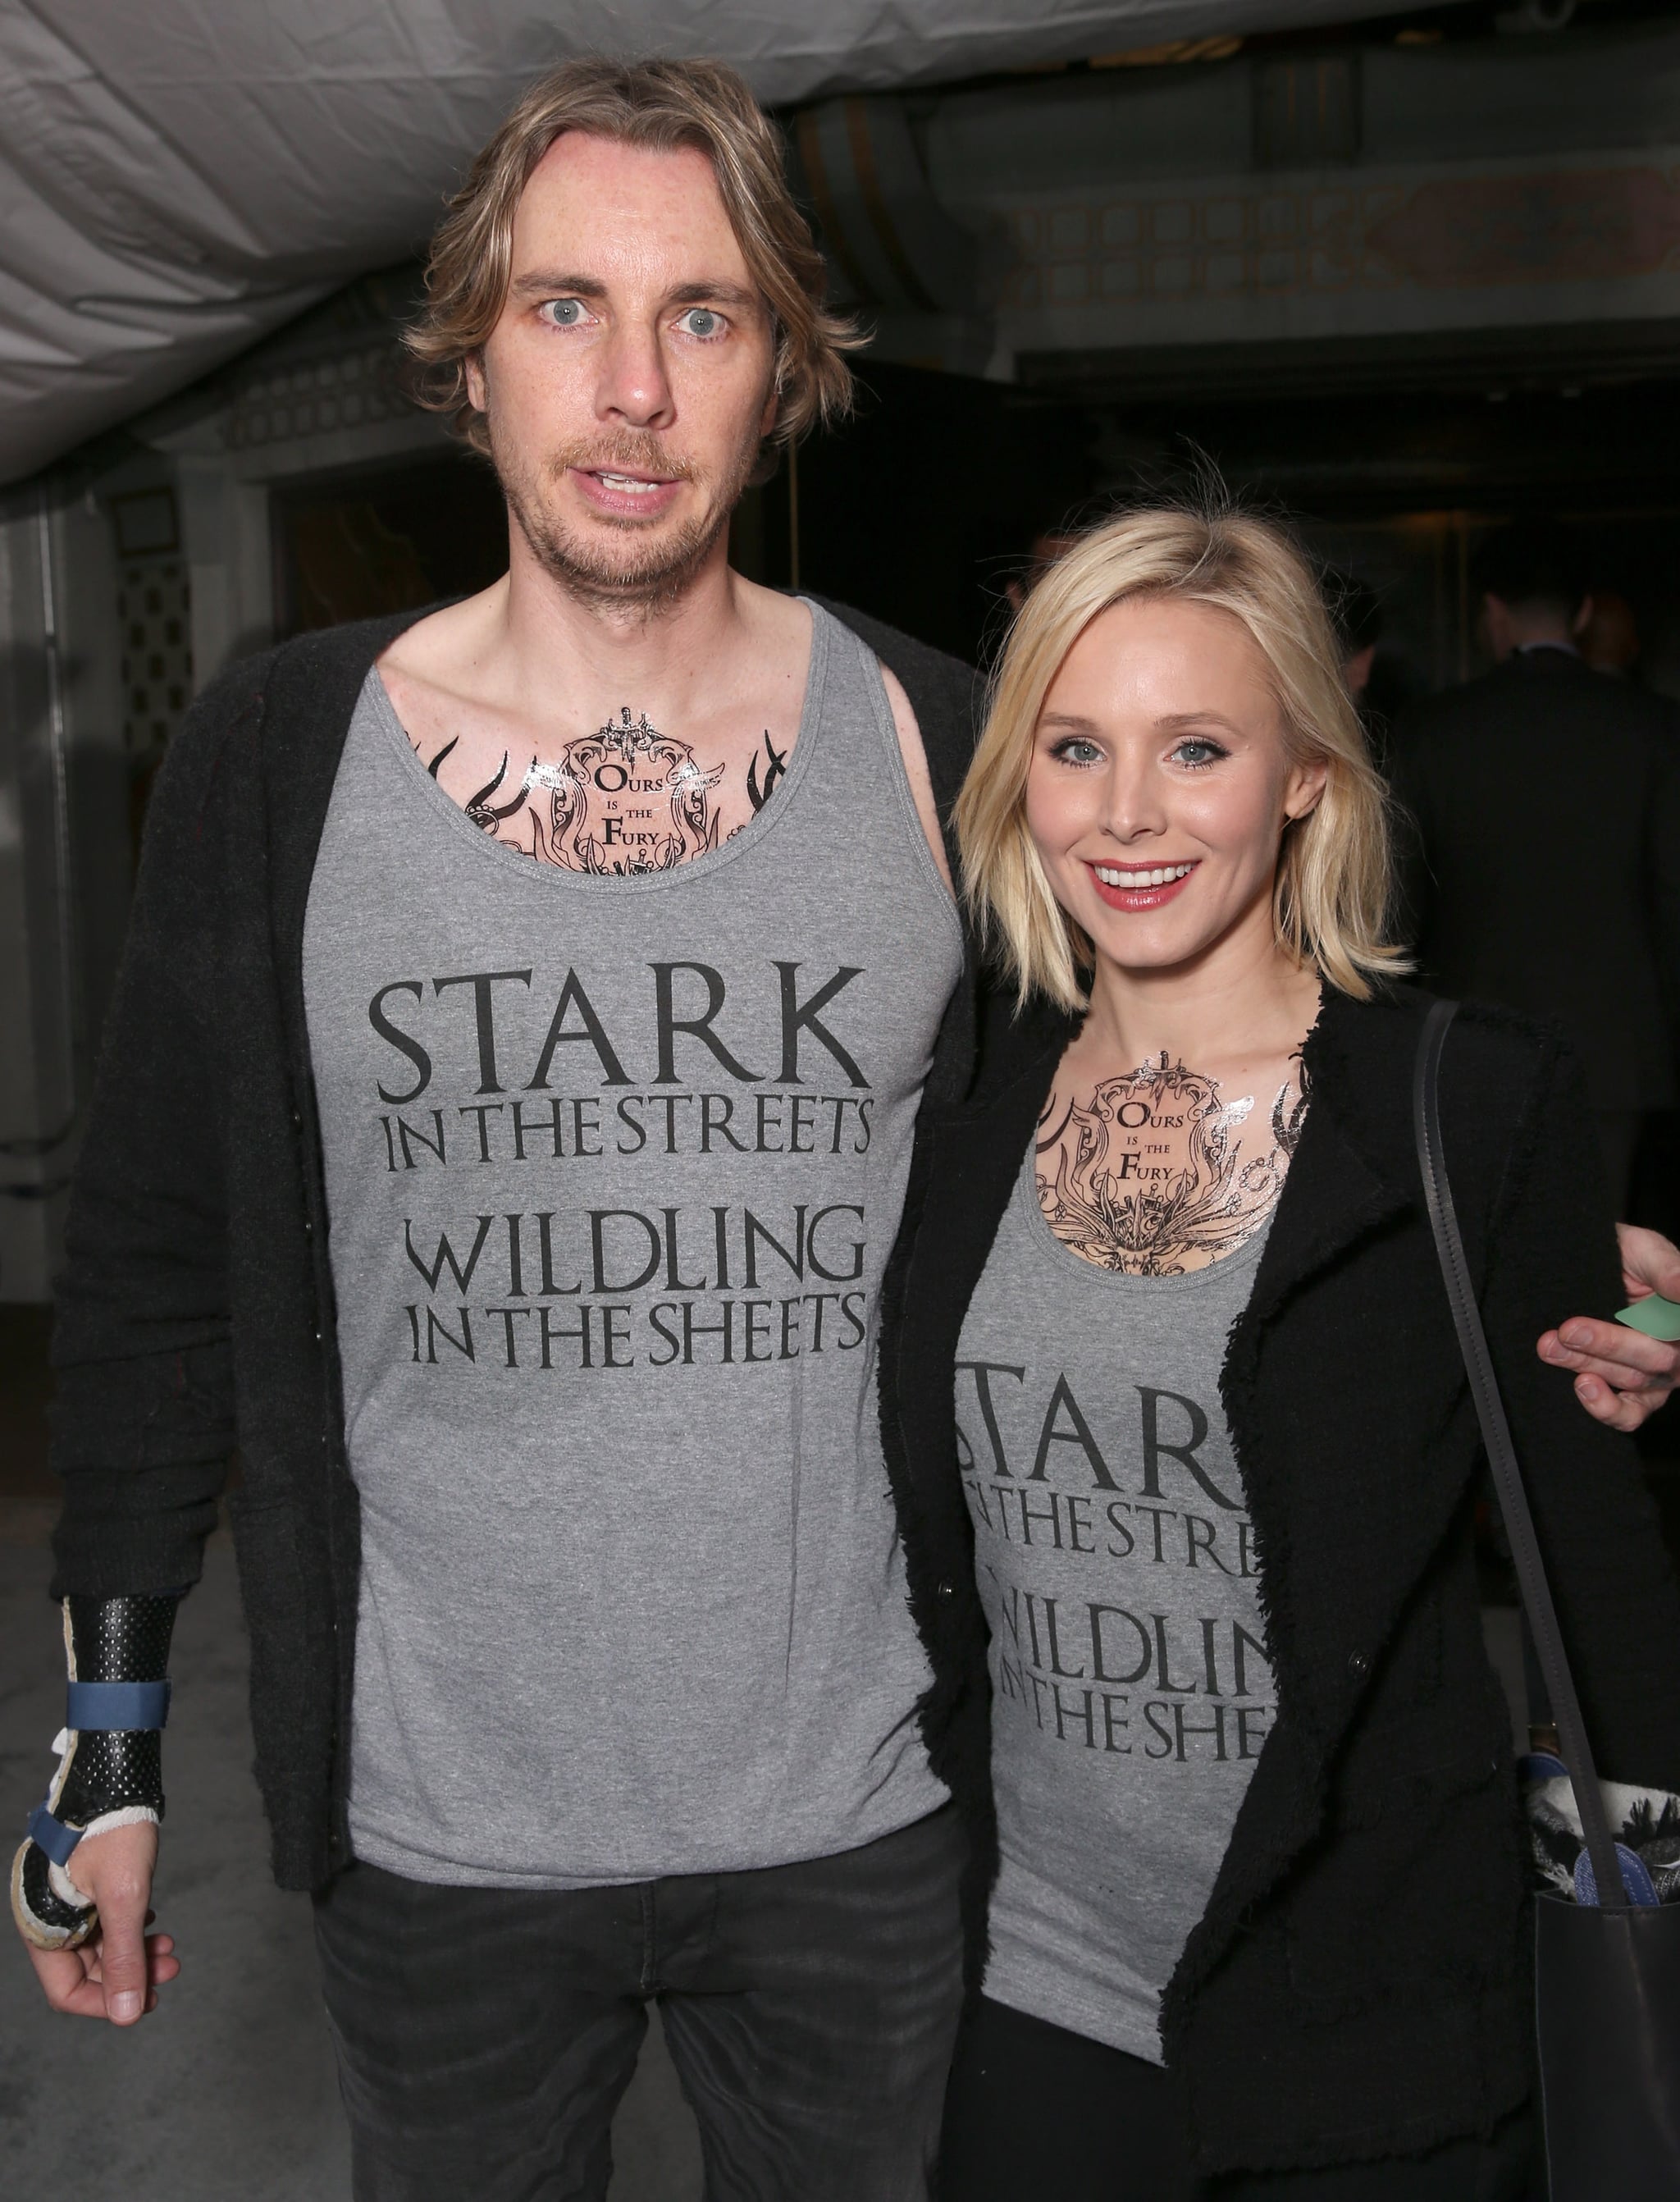 Dax Got a Tattoo of a Bell Instead of Wearing a Wedding Ring  The Complete  and Utterly Wonderful History of Kristen Bell and Dax Shepards Romance   POPSUGAR Celebrity Photo 7